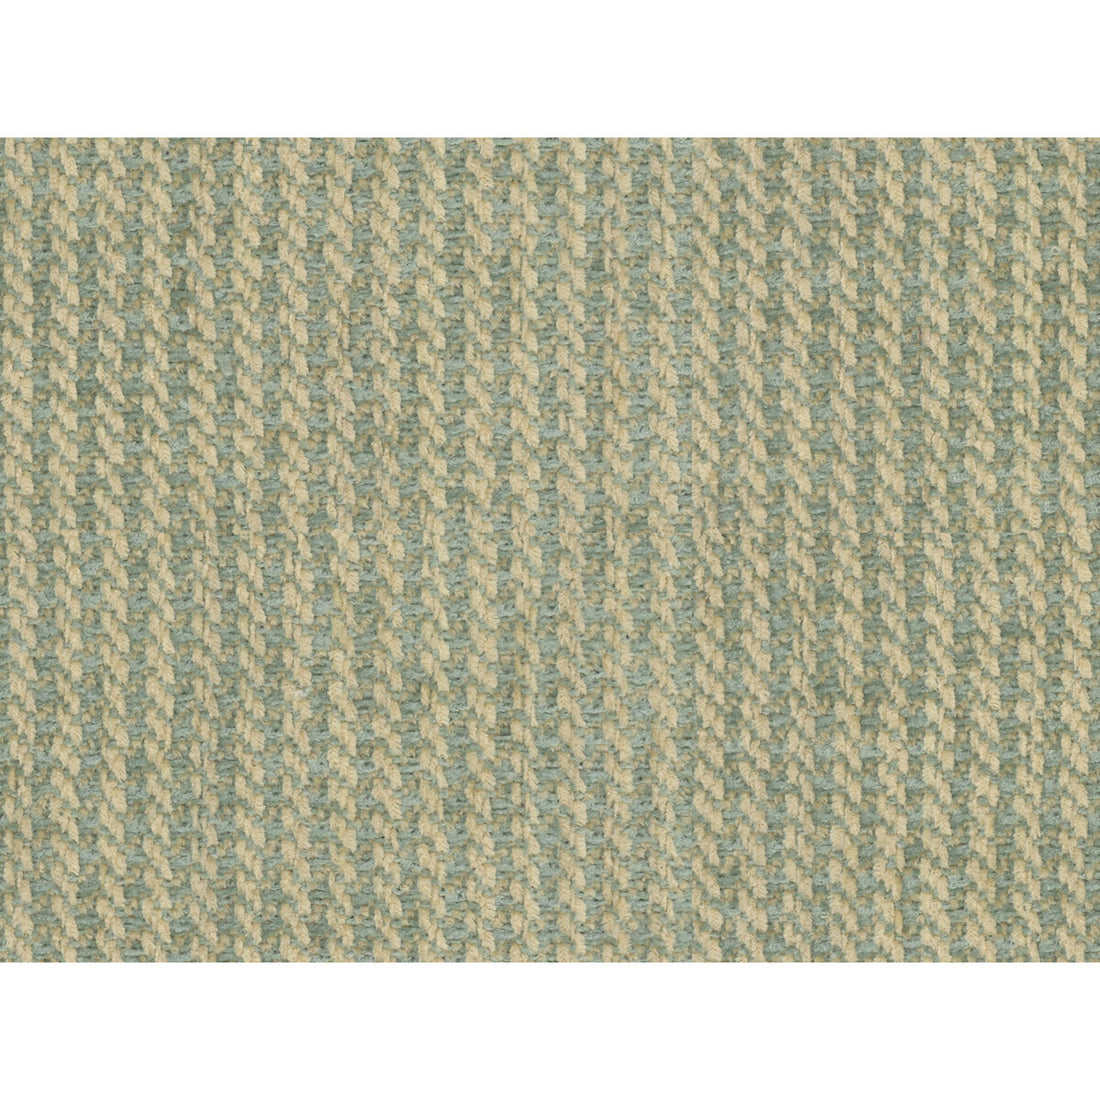 Granier Chenille fabric in seagreen color - pattern 8016105.13.0 - by Brunschwig &amp; Fils in the Chambery Textures collection